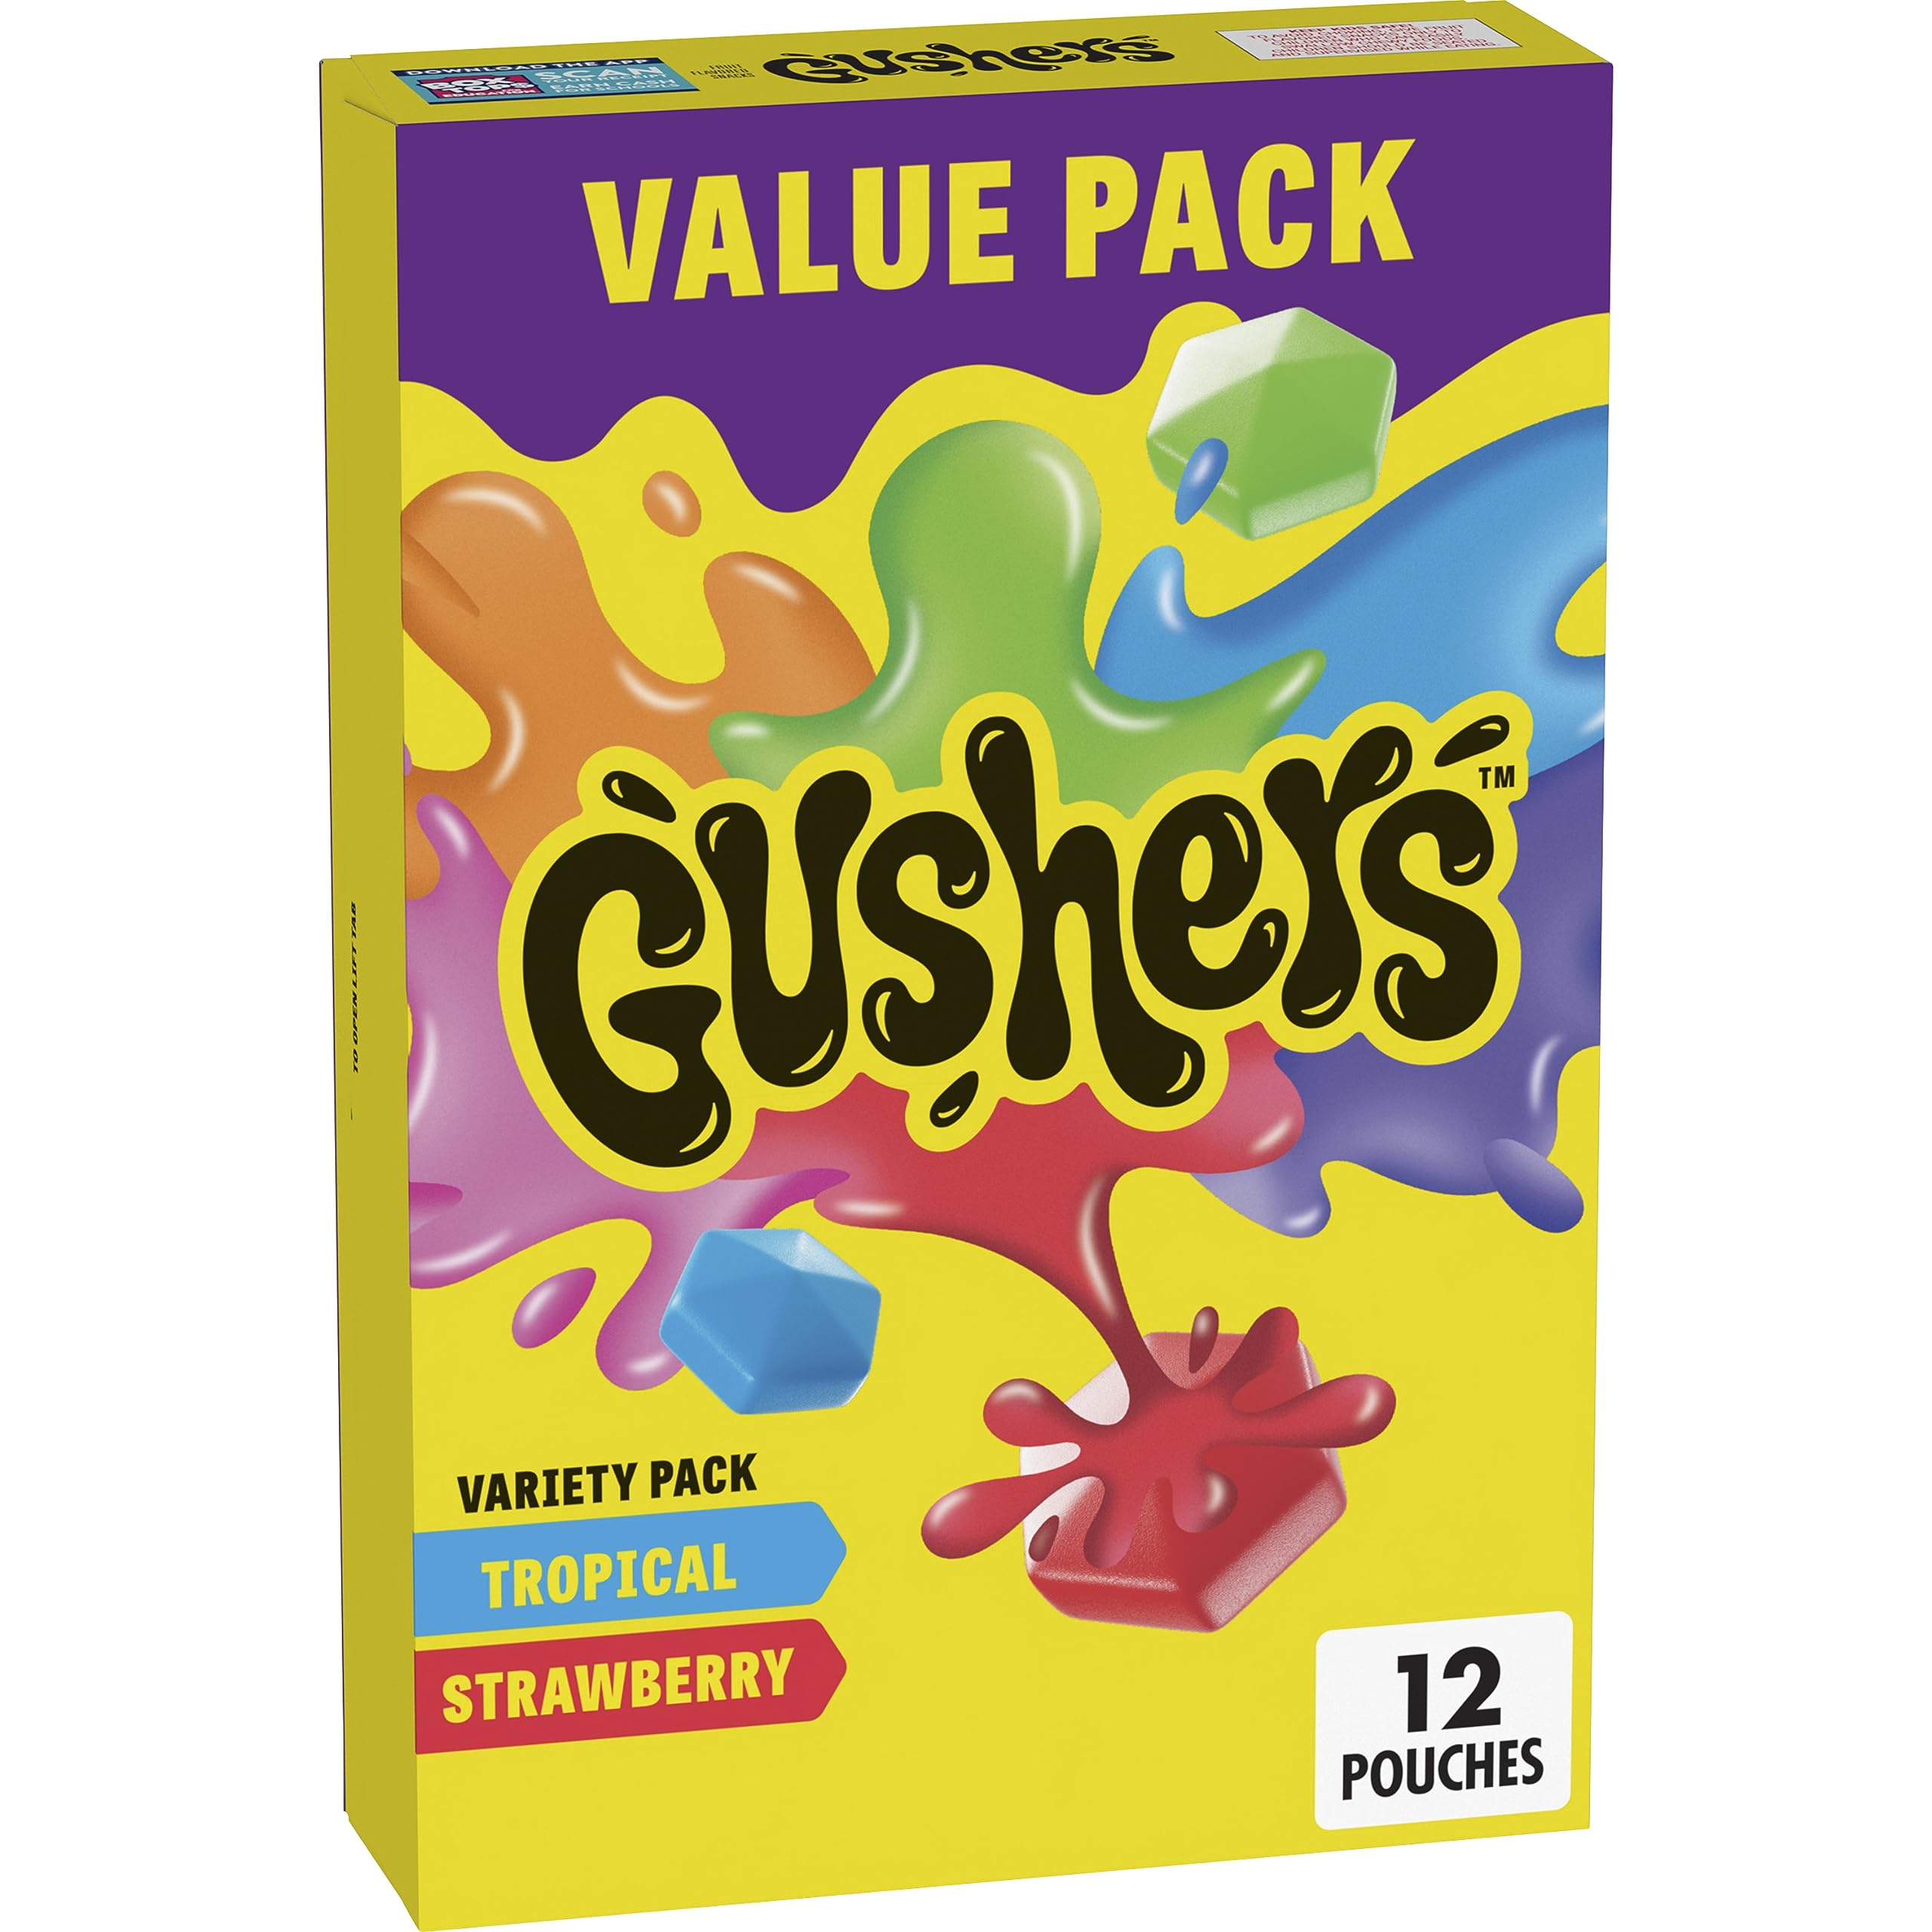 12-Count Gushers Fruit Flavored Snacks Variety Pack (Strawberry and Tropical) $4.26 w/ S&S + Free Shipping w/ Prime or Orders $35+